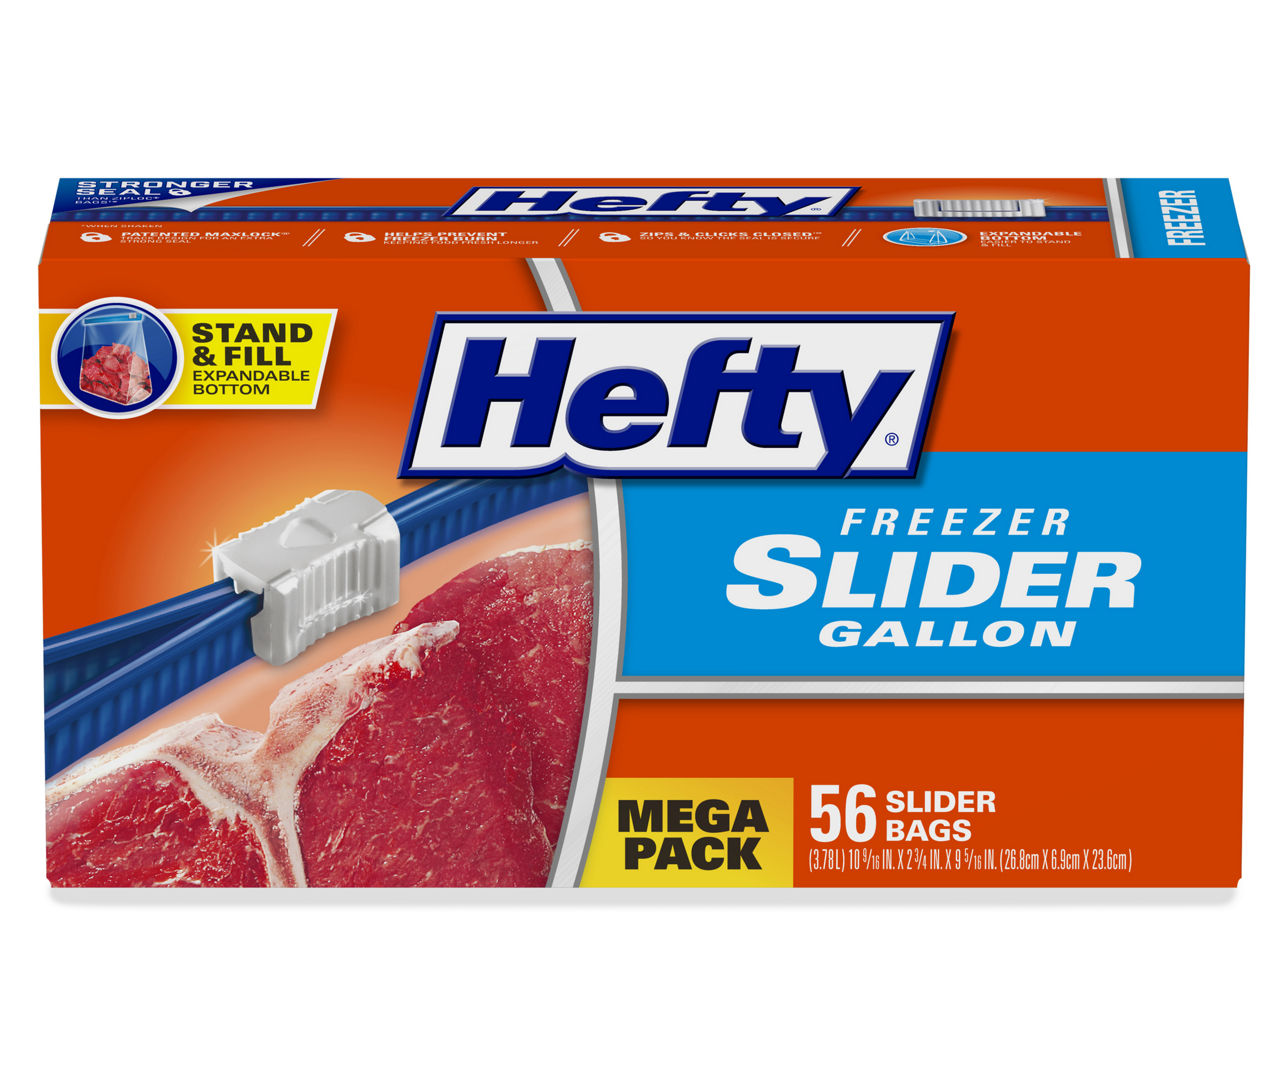 Hefty 1 Gal. Slider Food Storage Bag (15-Count) Stand & Fill Expandable  Bottom